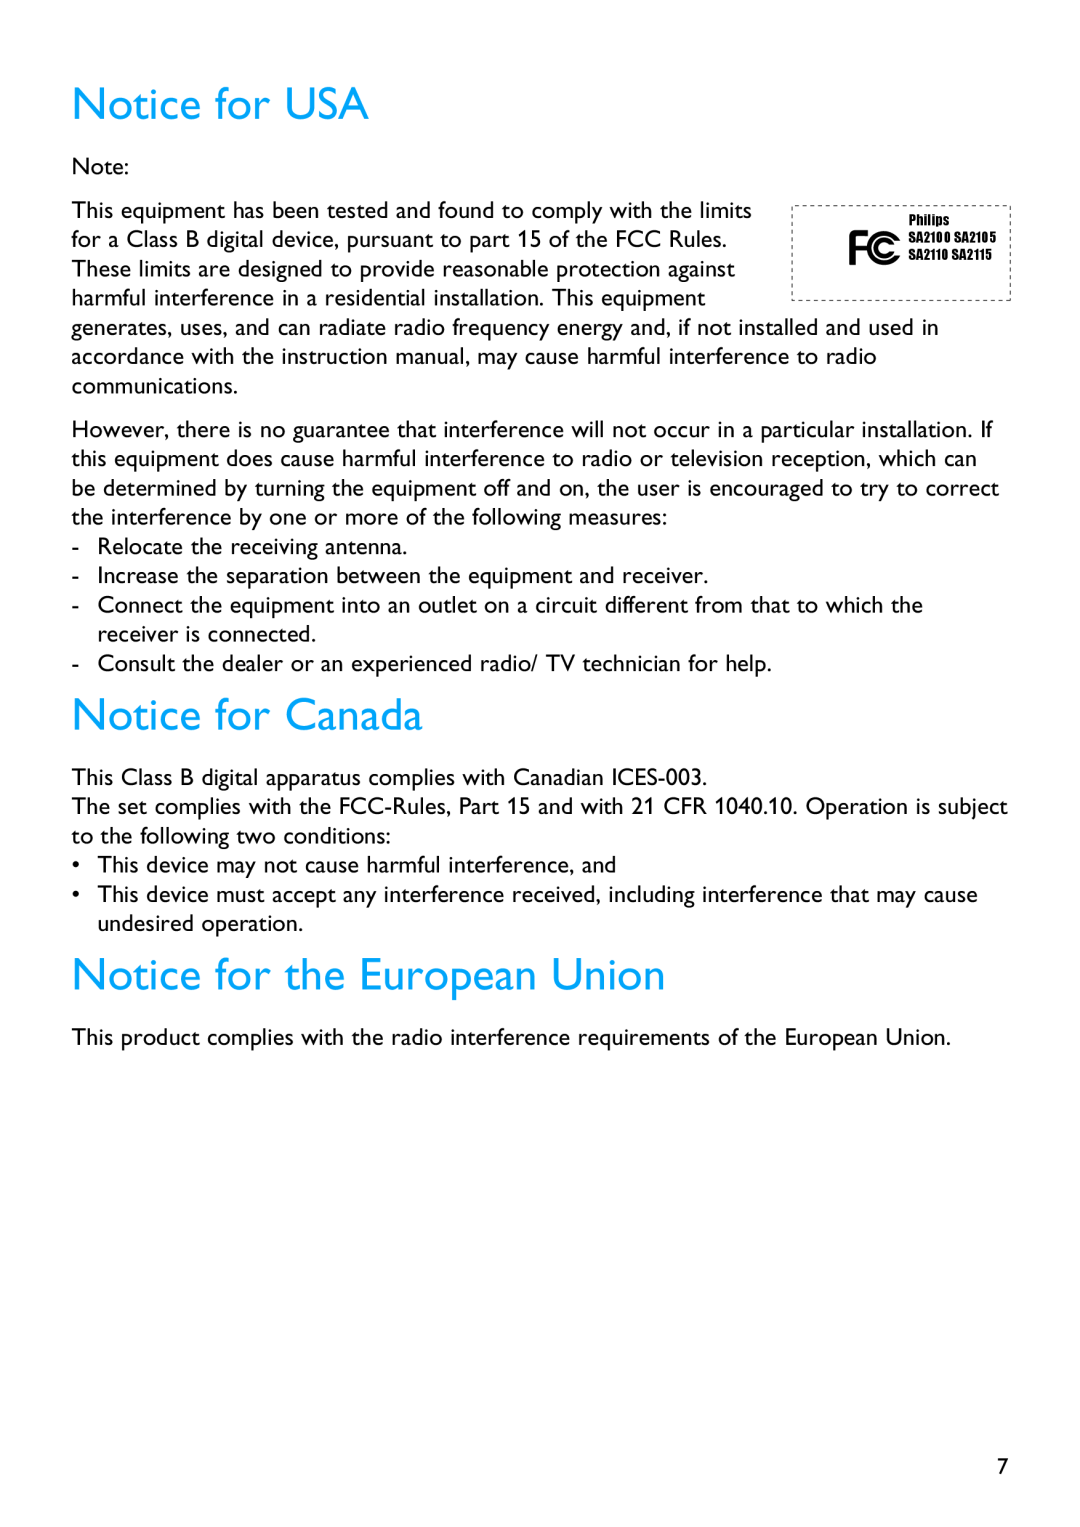 Philips SA2104, SA2124, SA2105, SA2101, SA2121, SA2114, SA2111 Notice for USA, Notice for Canada, Notice for the European Union 